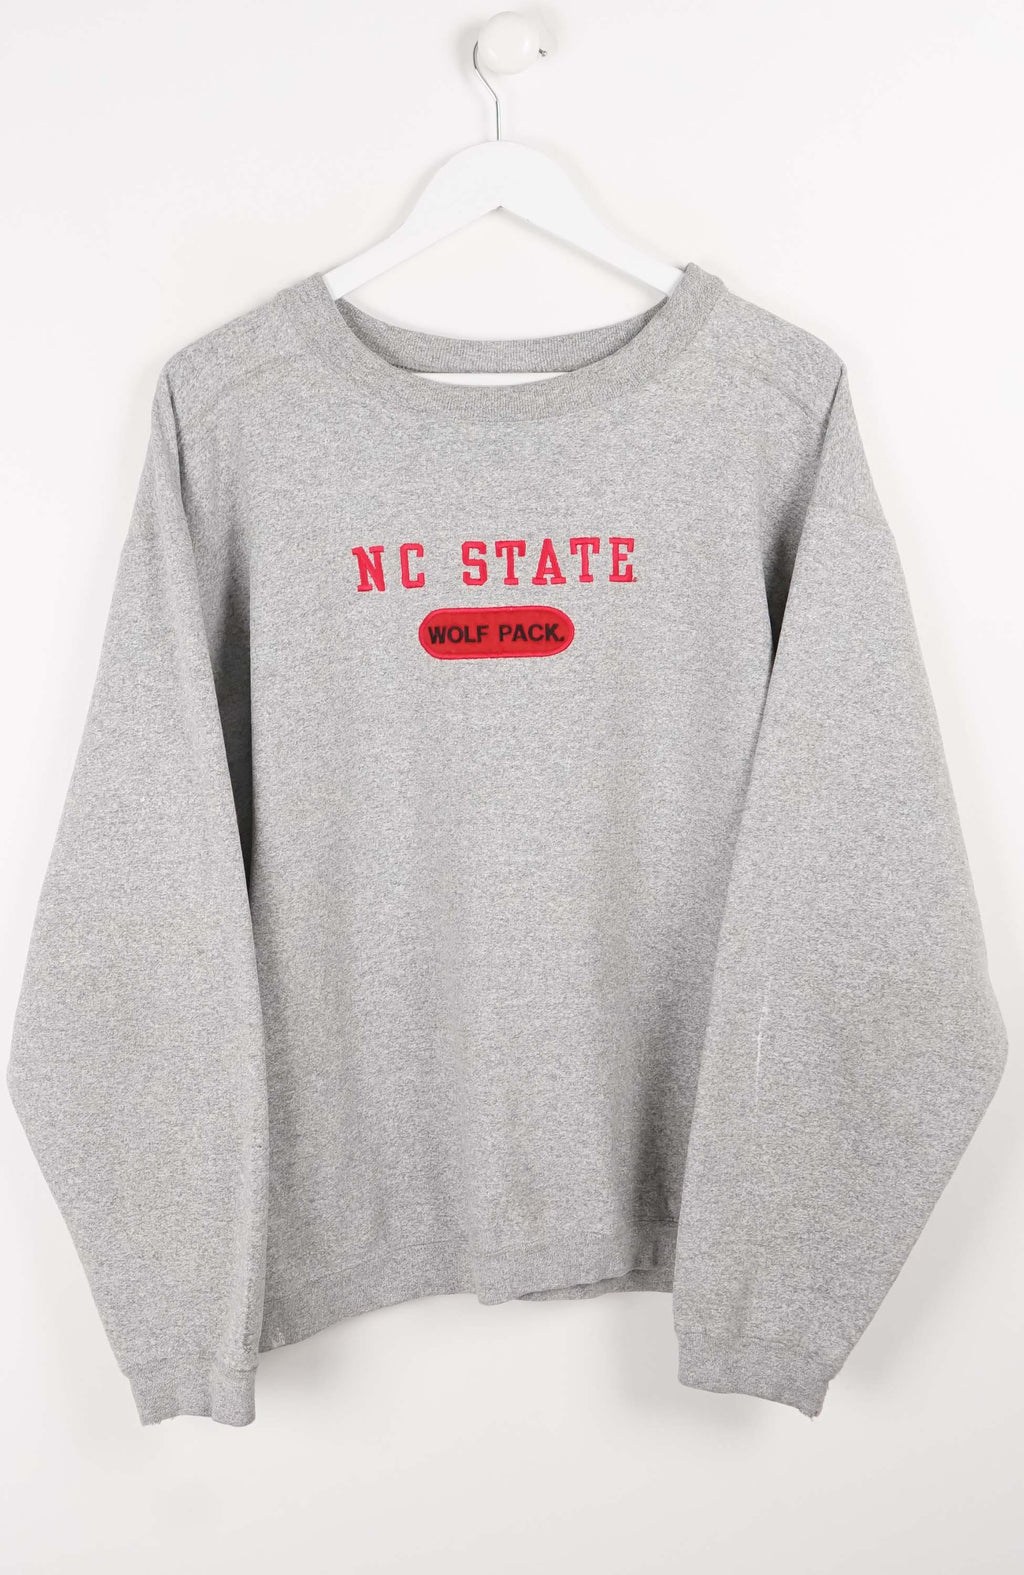 VINTAGE NC STATE WOLFPACK SWEATER (M) 